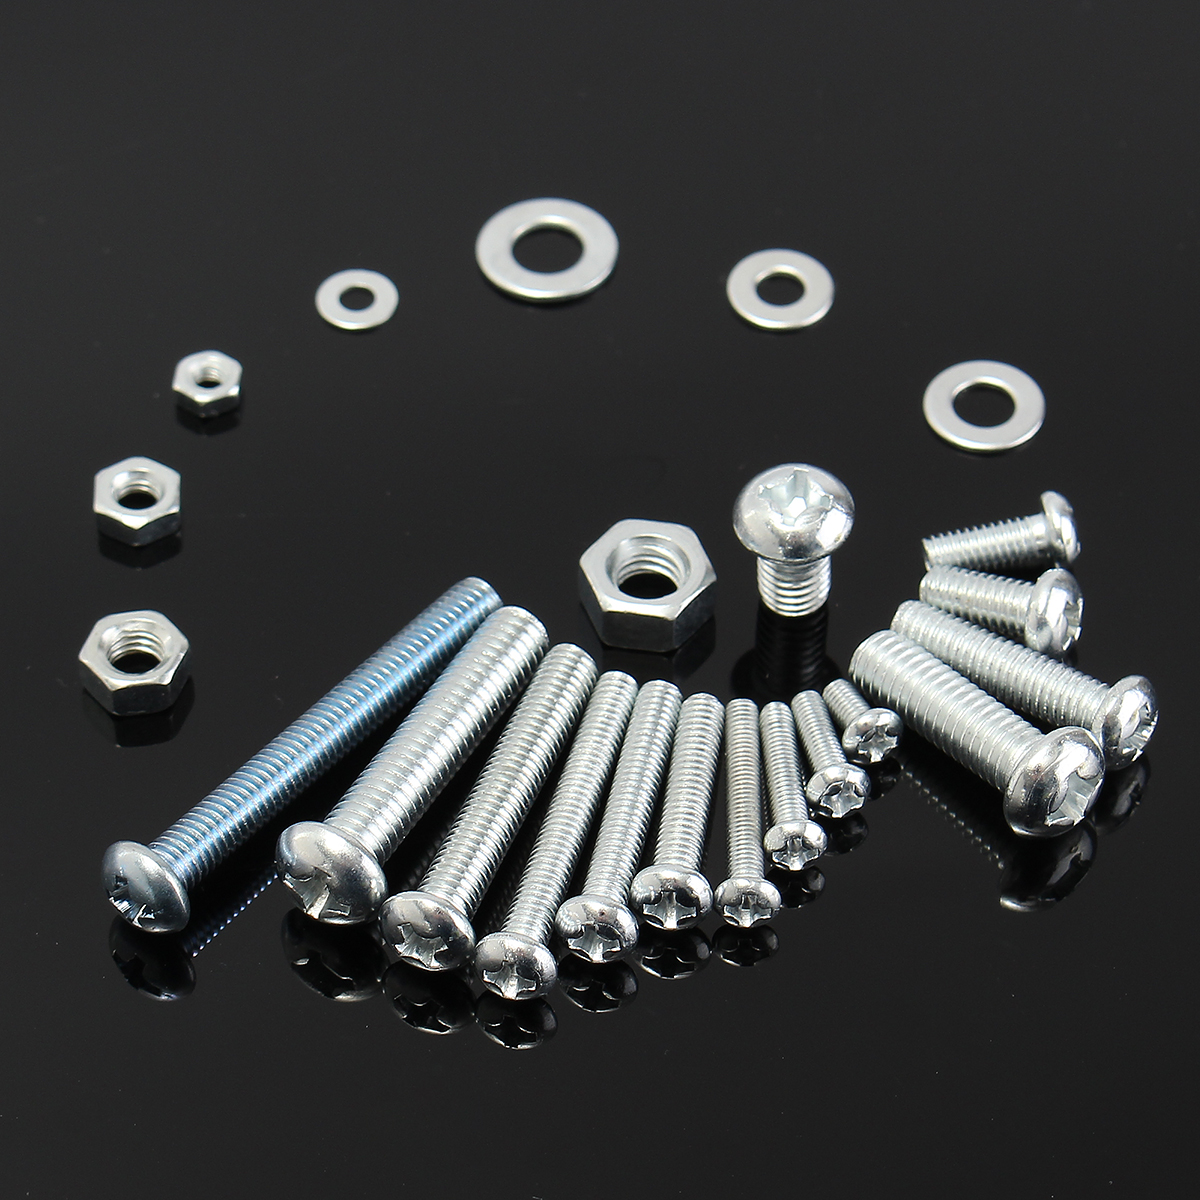 M3-M4-M5-M6-Stainless-Steel-Phillips-Round-Head-Screws-Nuts-Flat-Washers-Assortment-Kit-900g-1194476-4